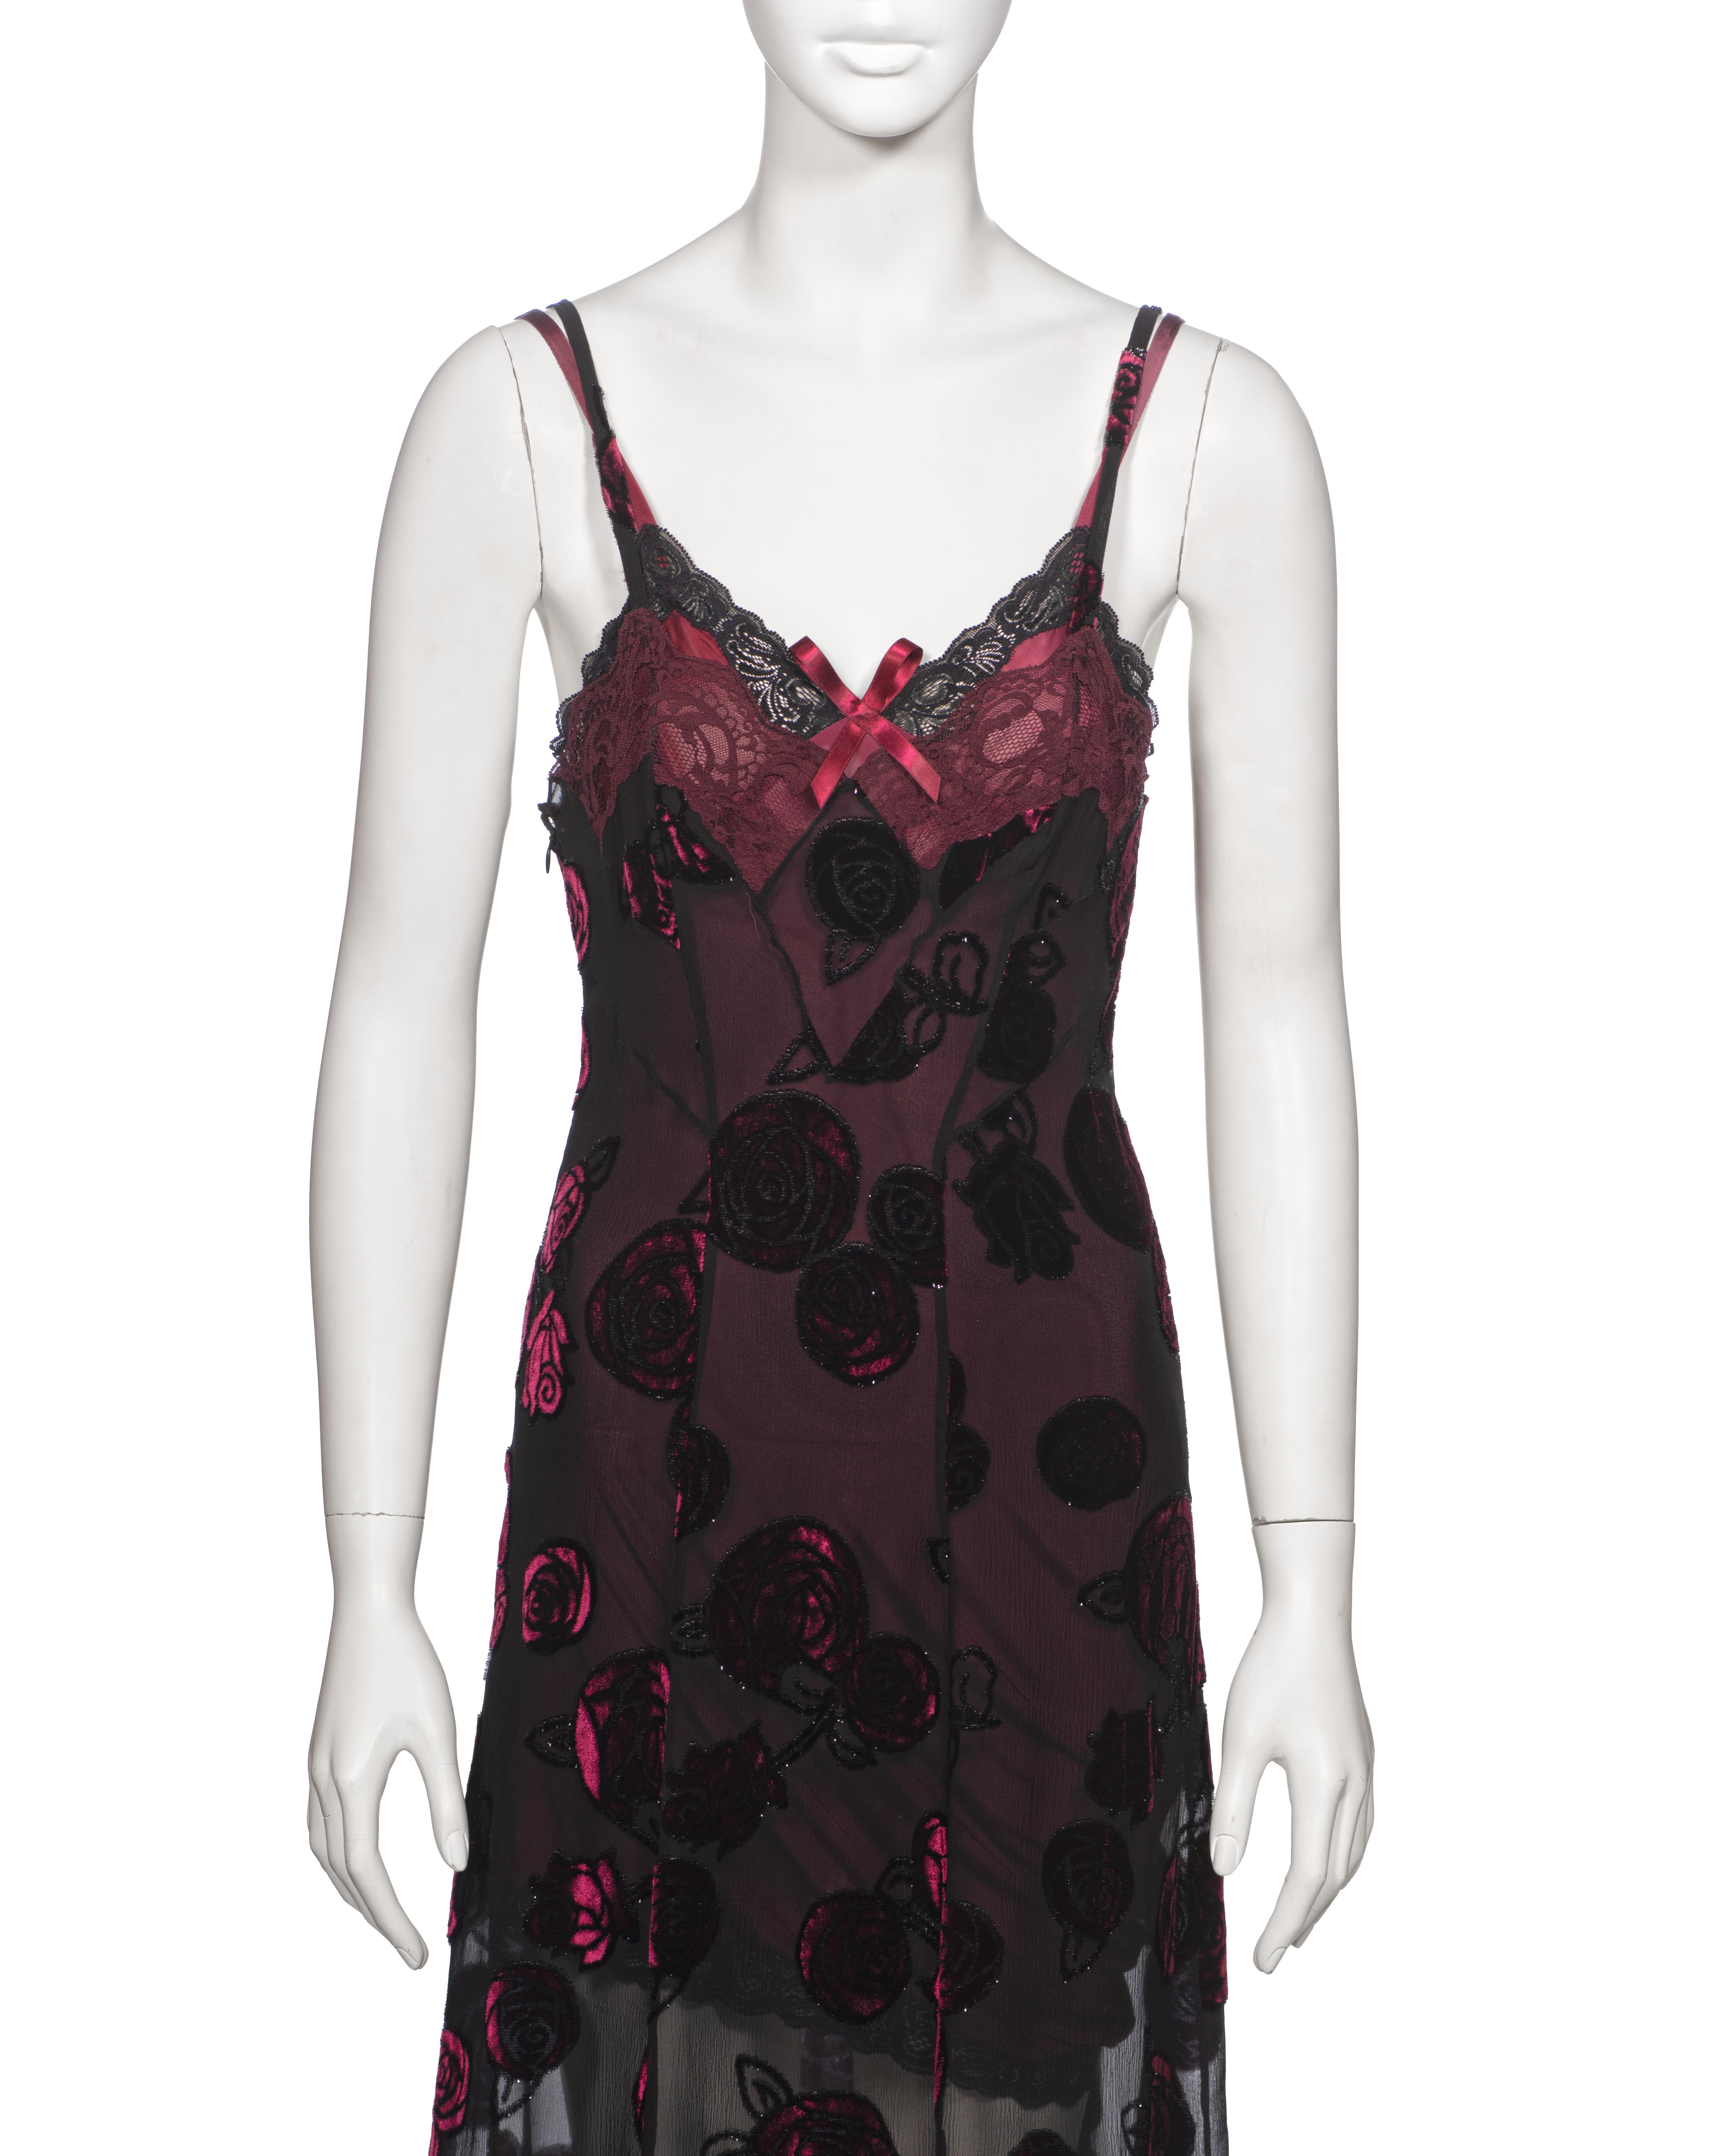 Christian Dior by John Galliano Double Layered Bordeaux Slip Dress, FW 2005 In Excellent Condition For Sale In London, GB